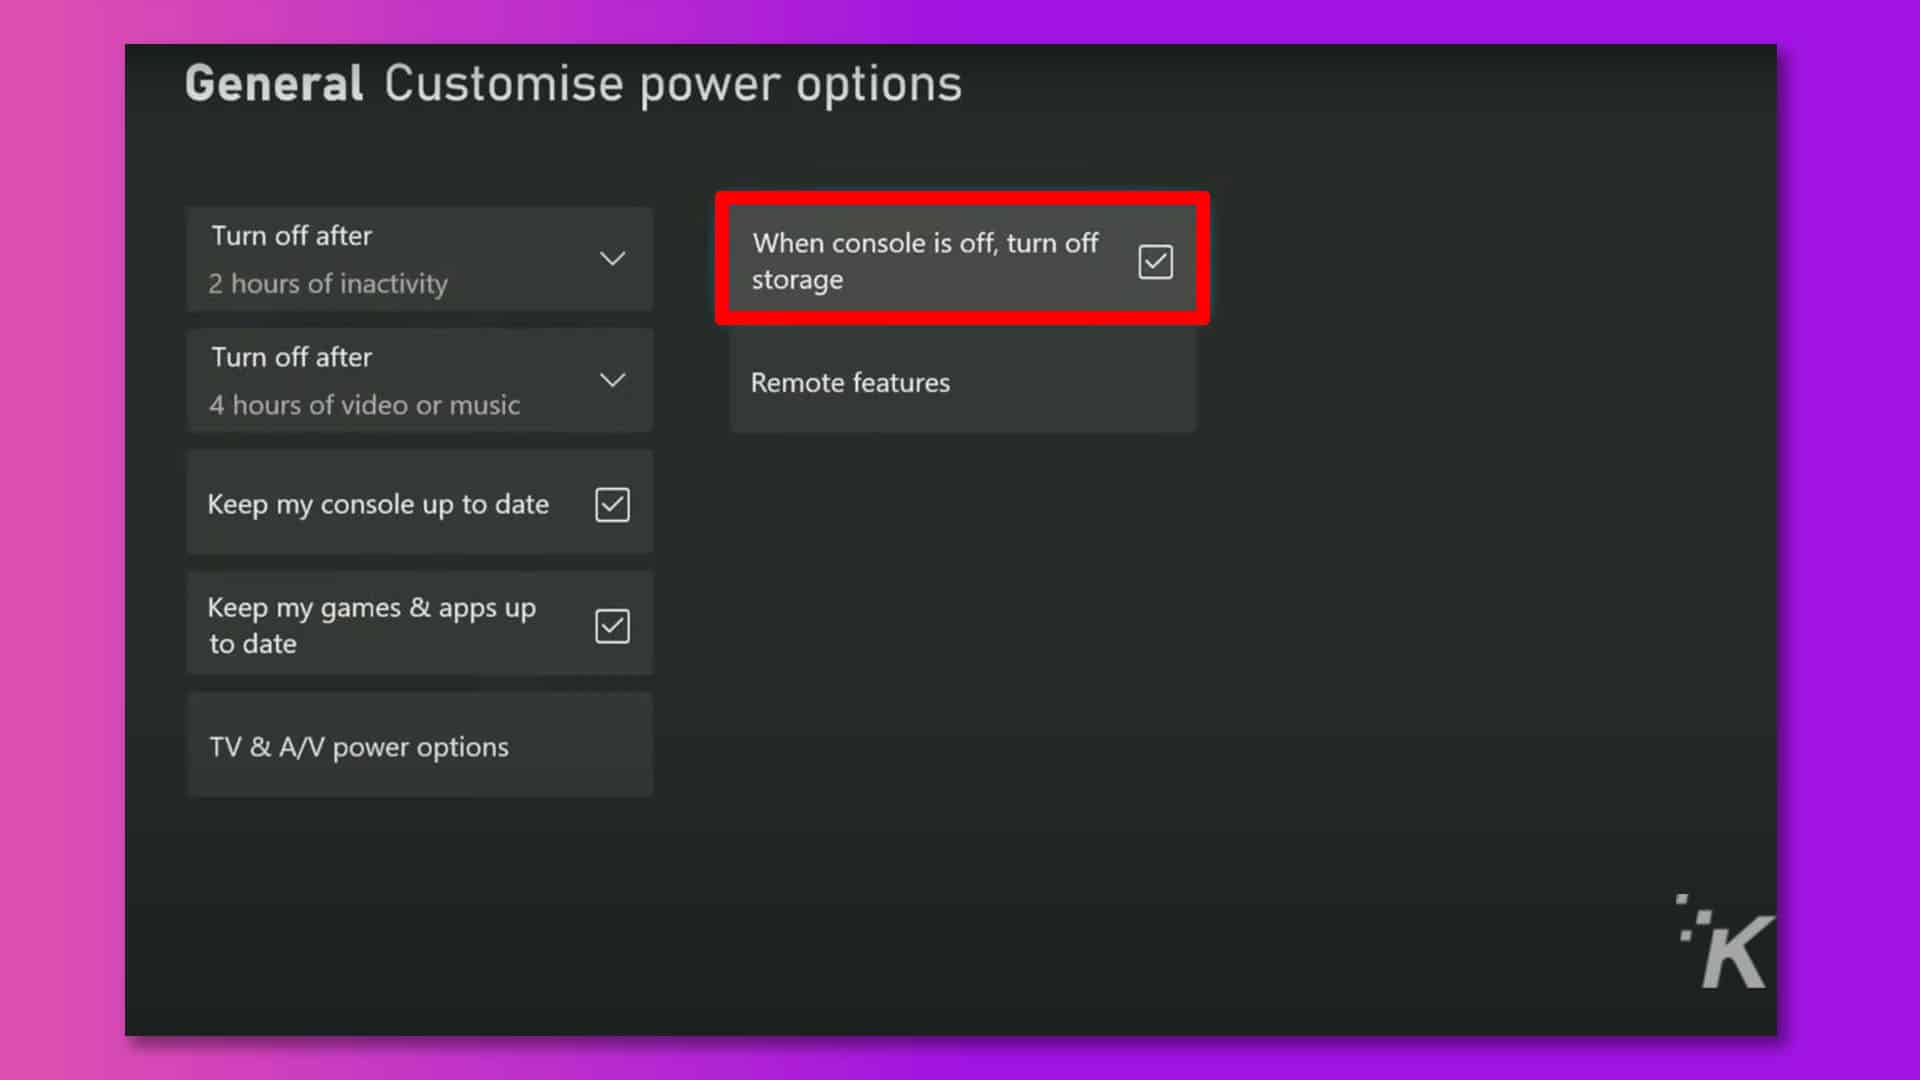 This image shows the power options available for a console, including turning off after two hours of inactivity and four hours of video or music, as well as keeping the console and games/apps up to date. Full Text: General Customise power options Turn off after When console is off, turn off 2 hours of inactivity storage Turn off after 4 hours of video or music Remote features Keep my console up to date Keep my games & apps up to date V TV & A/V power options ·K